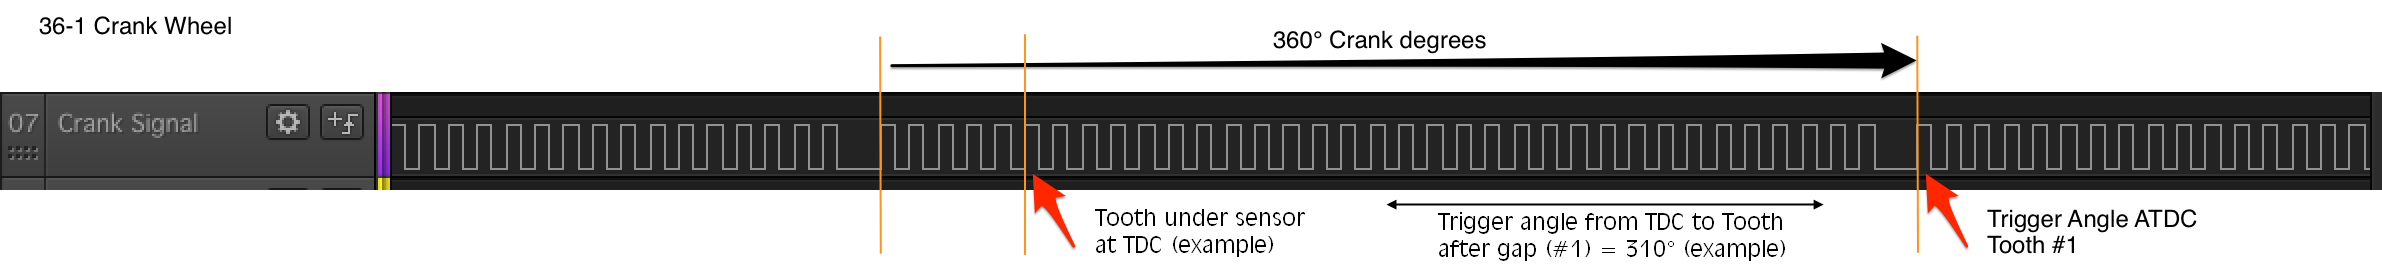 Example missing tooth pulse pattern